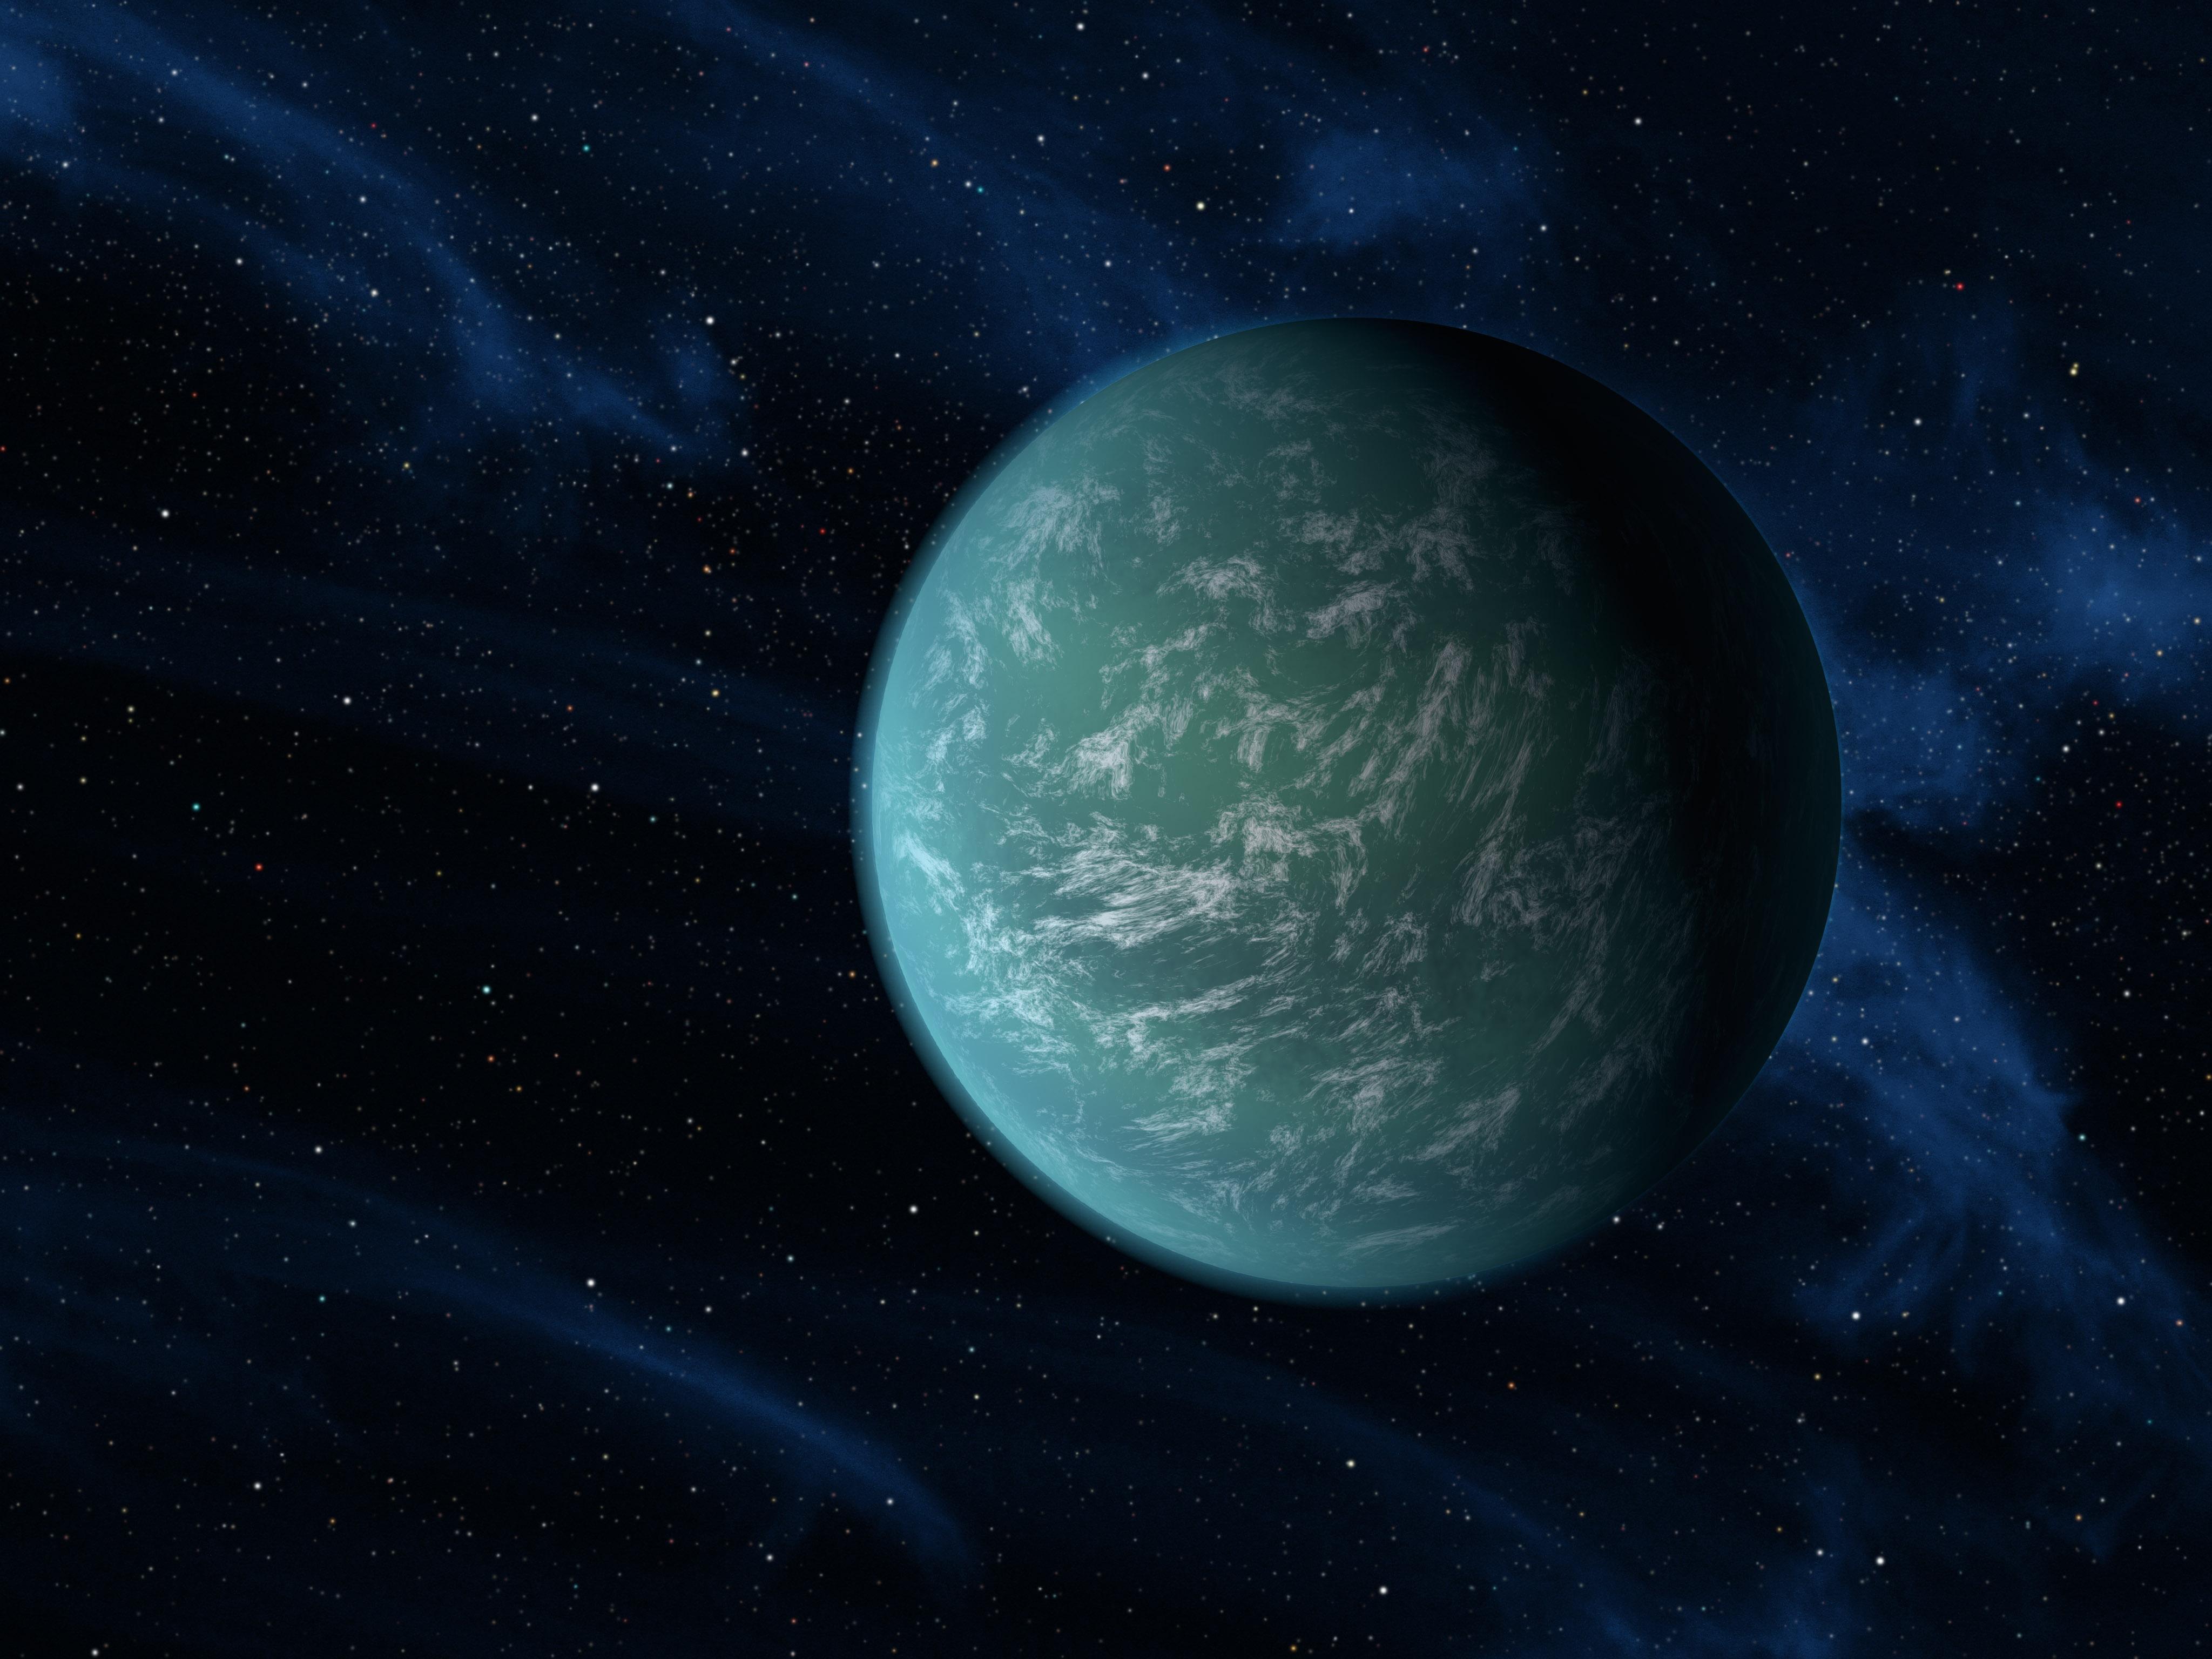 An illustration of a greenish-blue, ocean-covered planet in space, with swirls of white cloud in places.